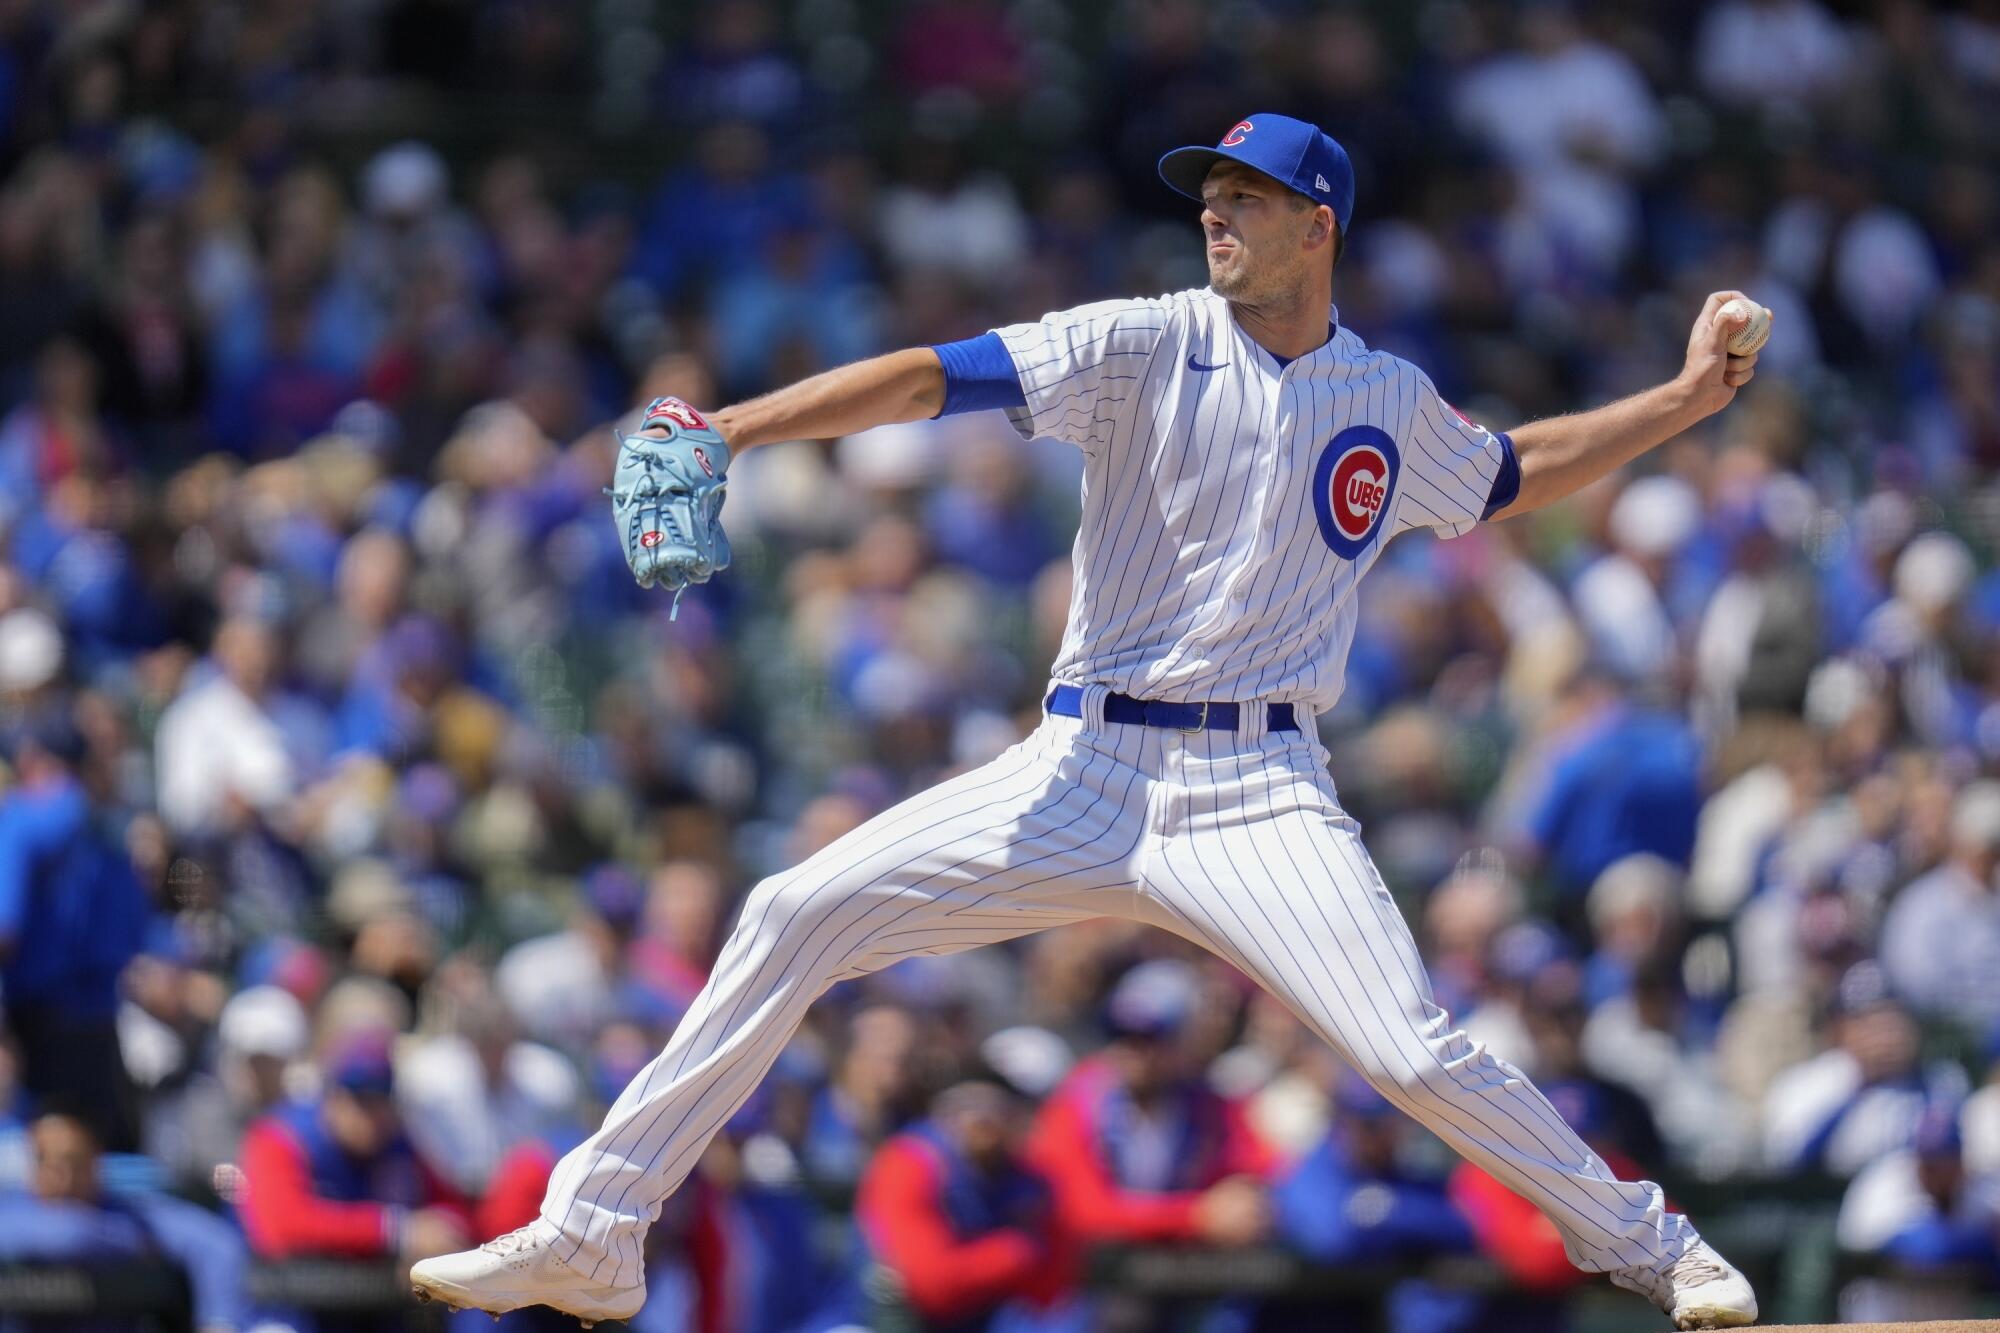 Dodgers blown out by Cubs, Drew Smyly flirts with perfect game